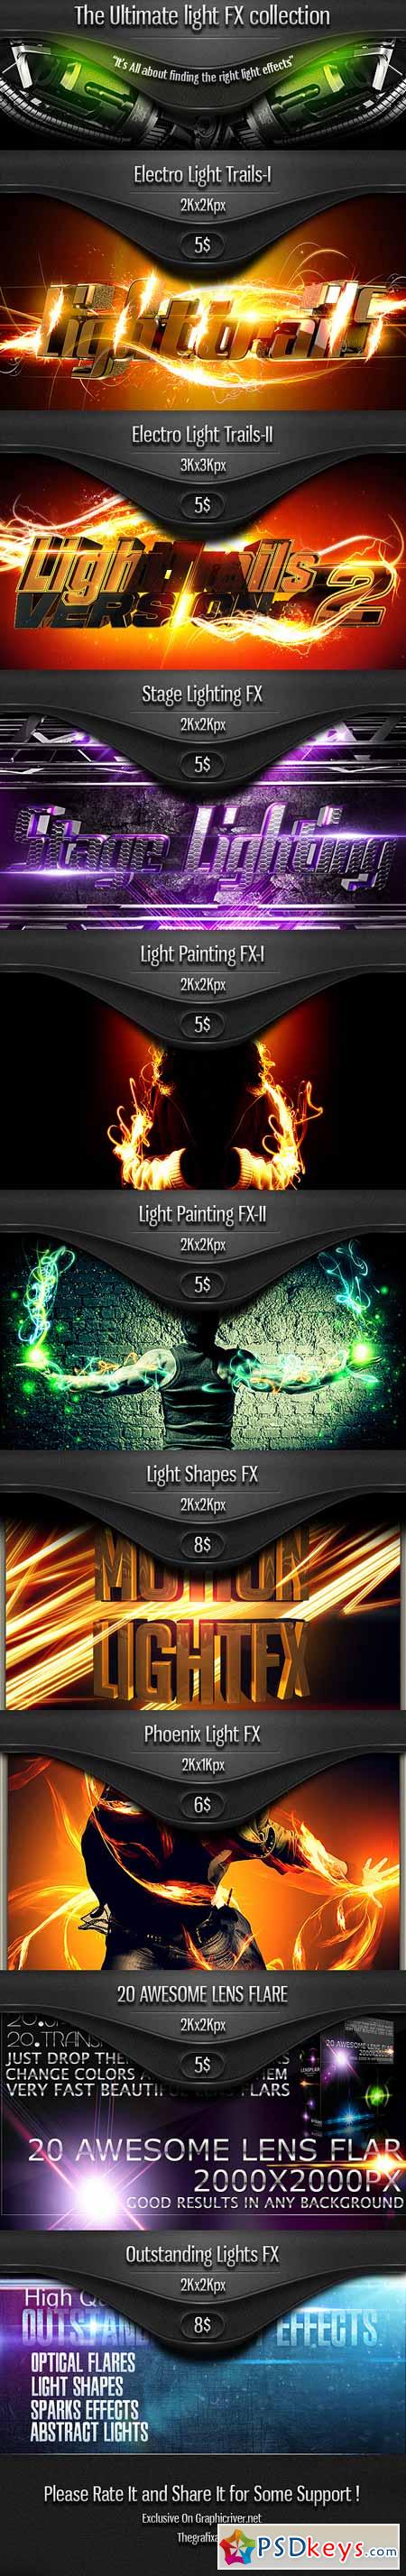 The Ultimate Light Effects Collection [THE BUNDLE] 5304180